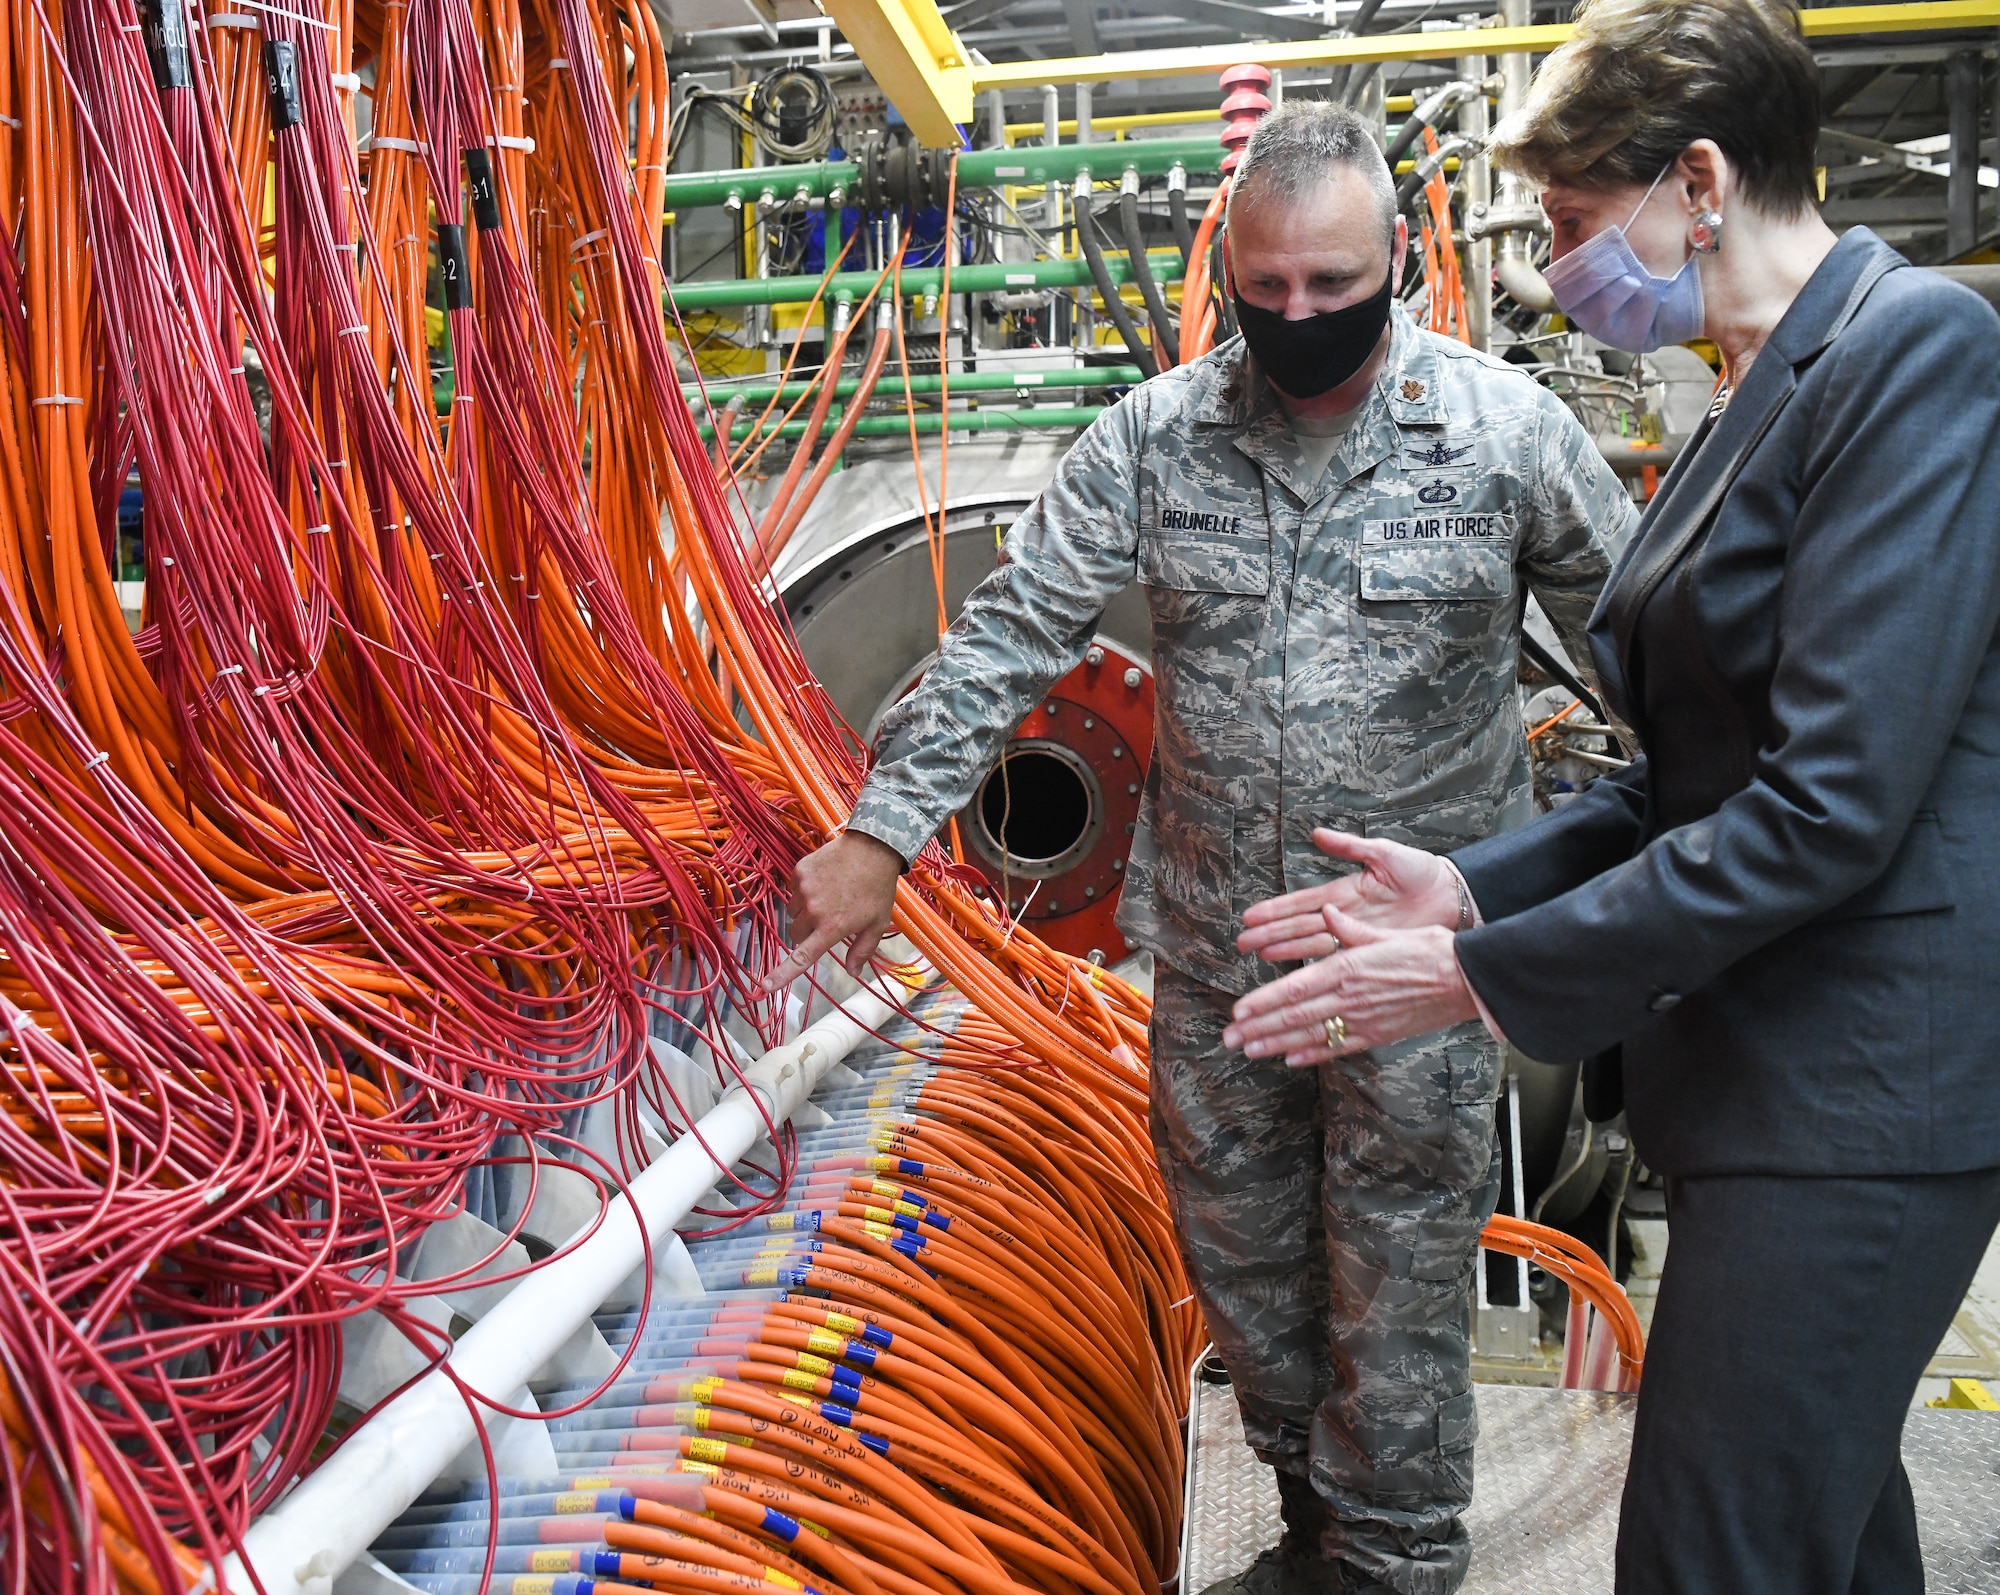 Maj. Christopher Brunelle, director of operations for the Arnold Engineering Development Complex Space and Missile Branch, explains the construction of an arc heater to Secretary of the Air Force Barbara Barrett during her visit, June 18, 2020, to Arnold Air Force Base, Tenn. Arc heaters provide high-enthalpy test environments to test materials and other means of thermal protection. (U.S. Air Force photo by Jill Pickett)